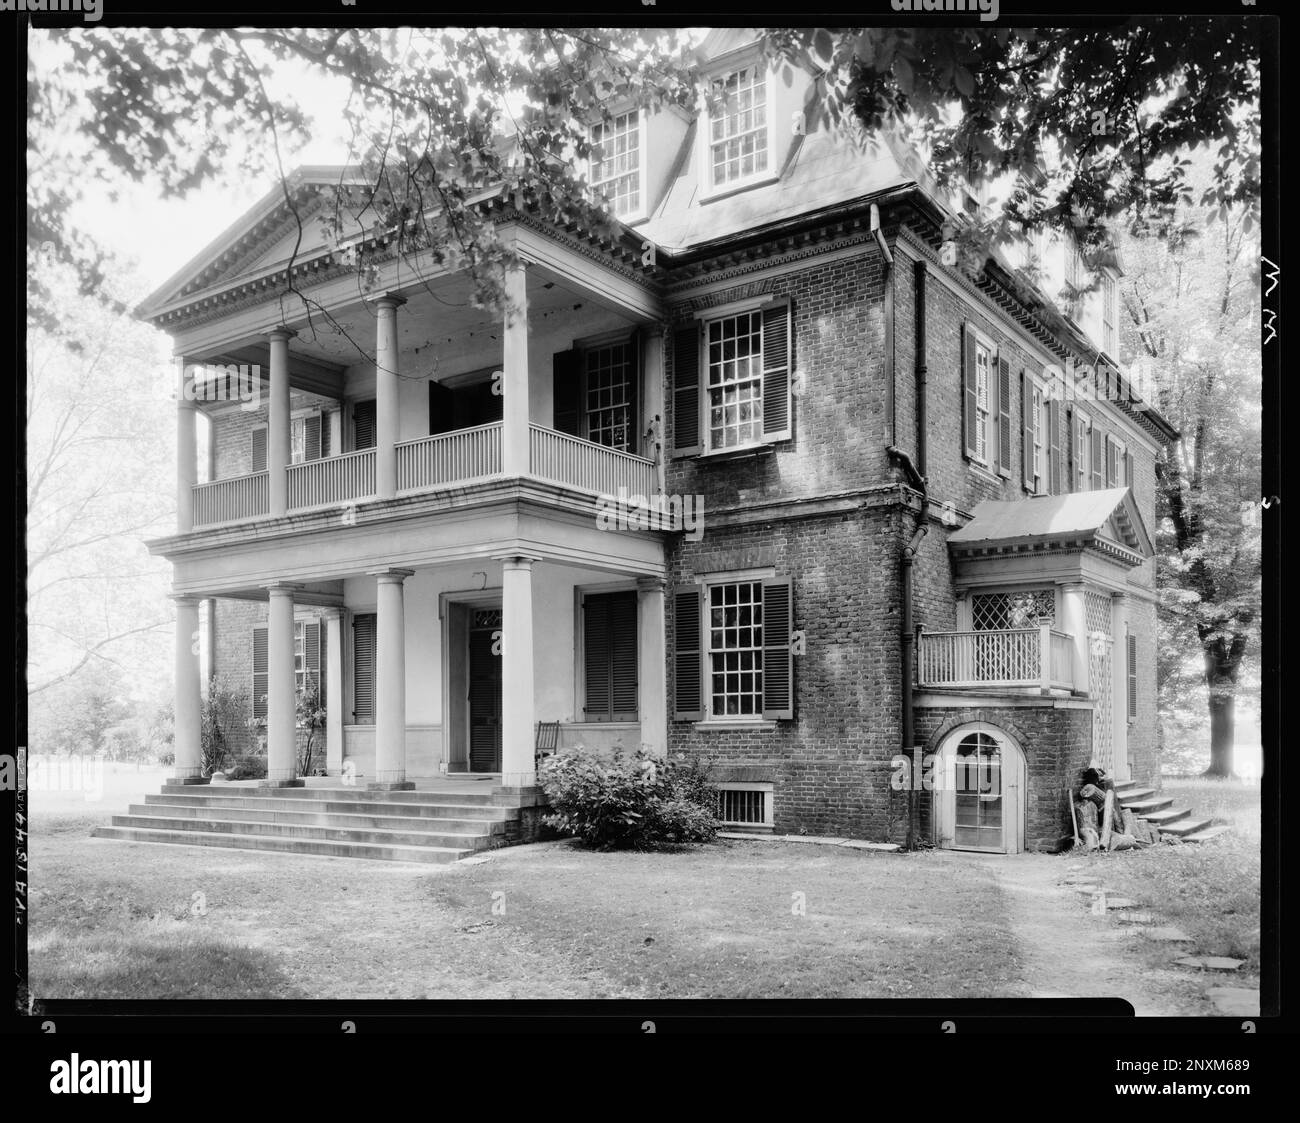 Shirley, Charles City County, Virginia. Carnegie Survey of the Architecture of the South. United States  Virginia  Charles City County  Shirley, Pediments, Balconies, Porches, Houses. Stock Photo